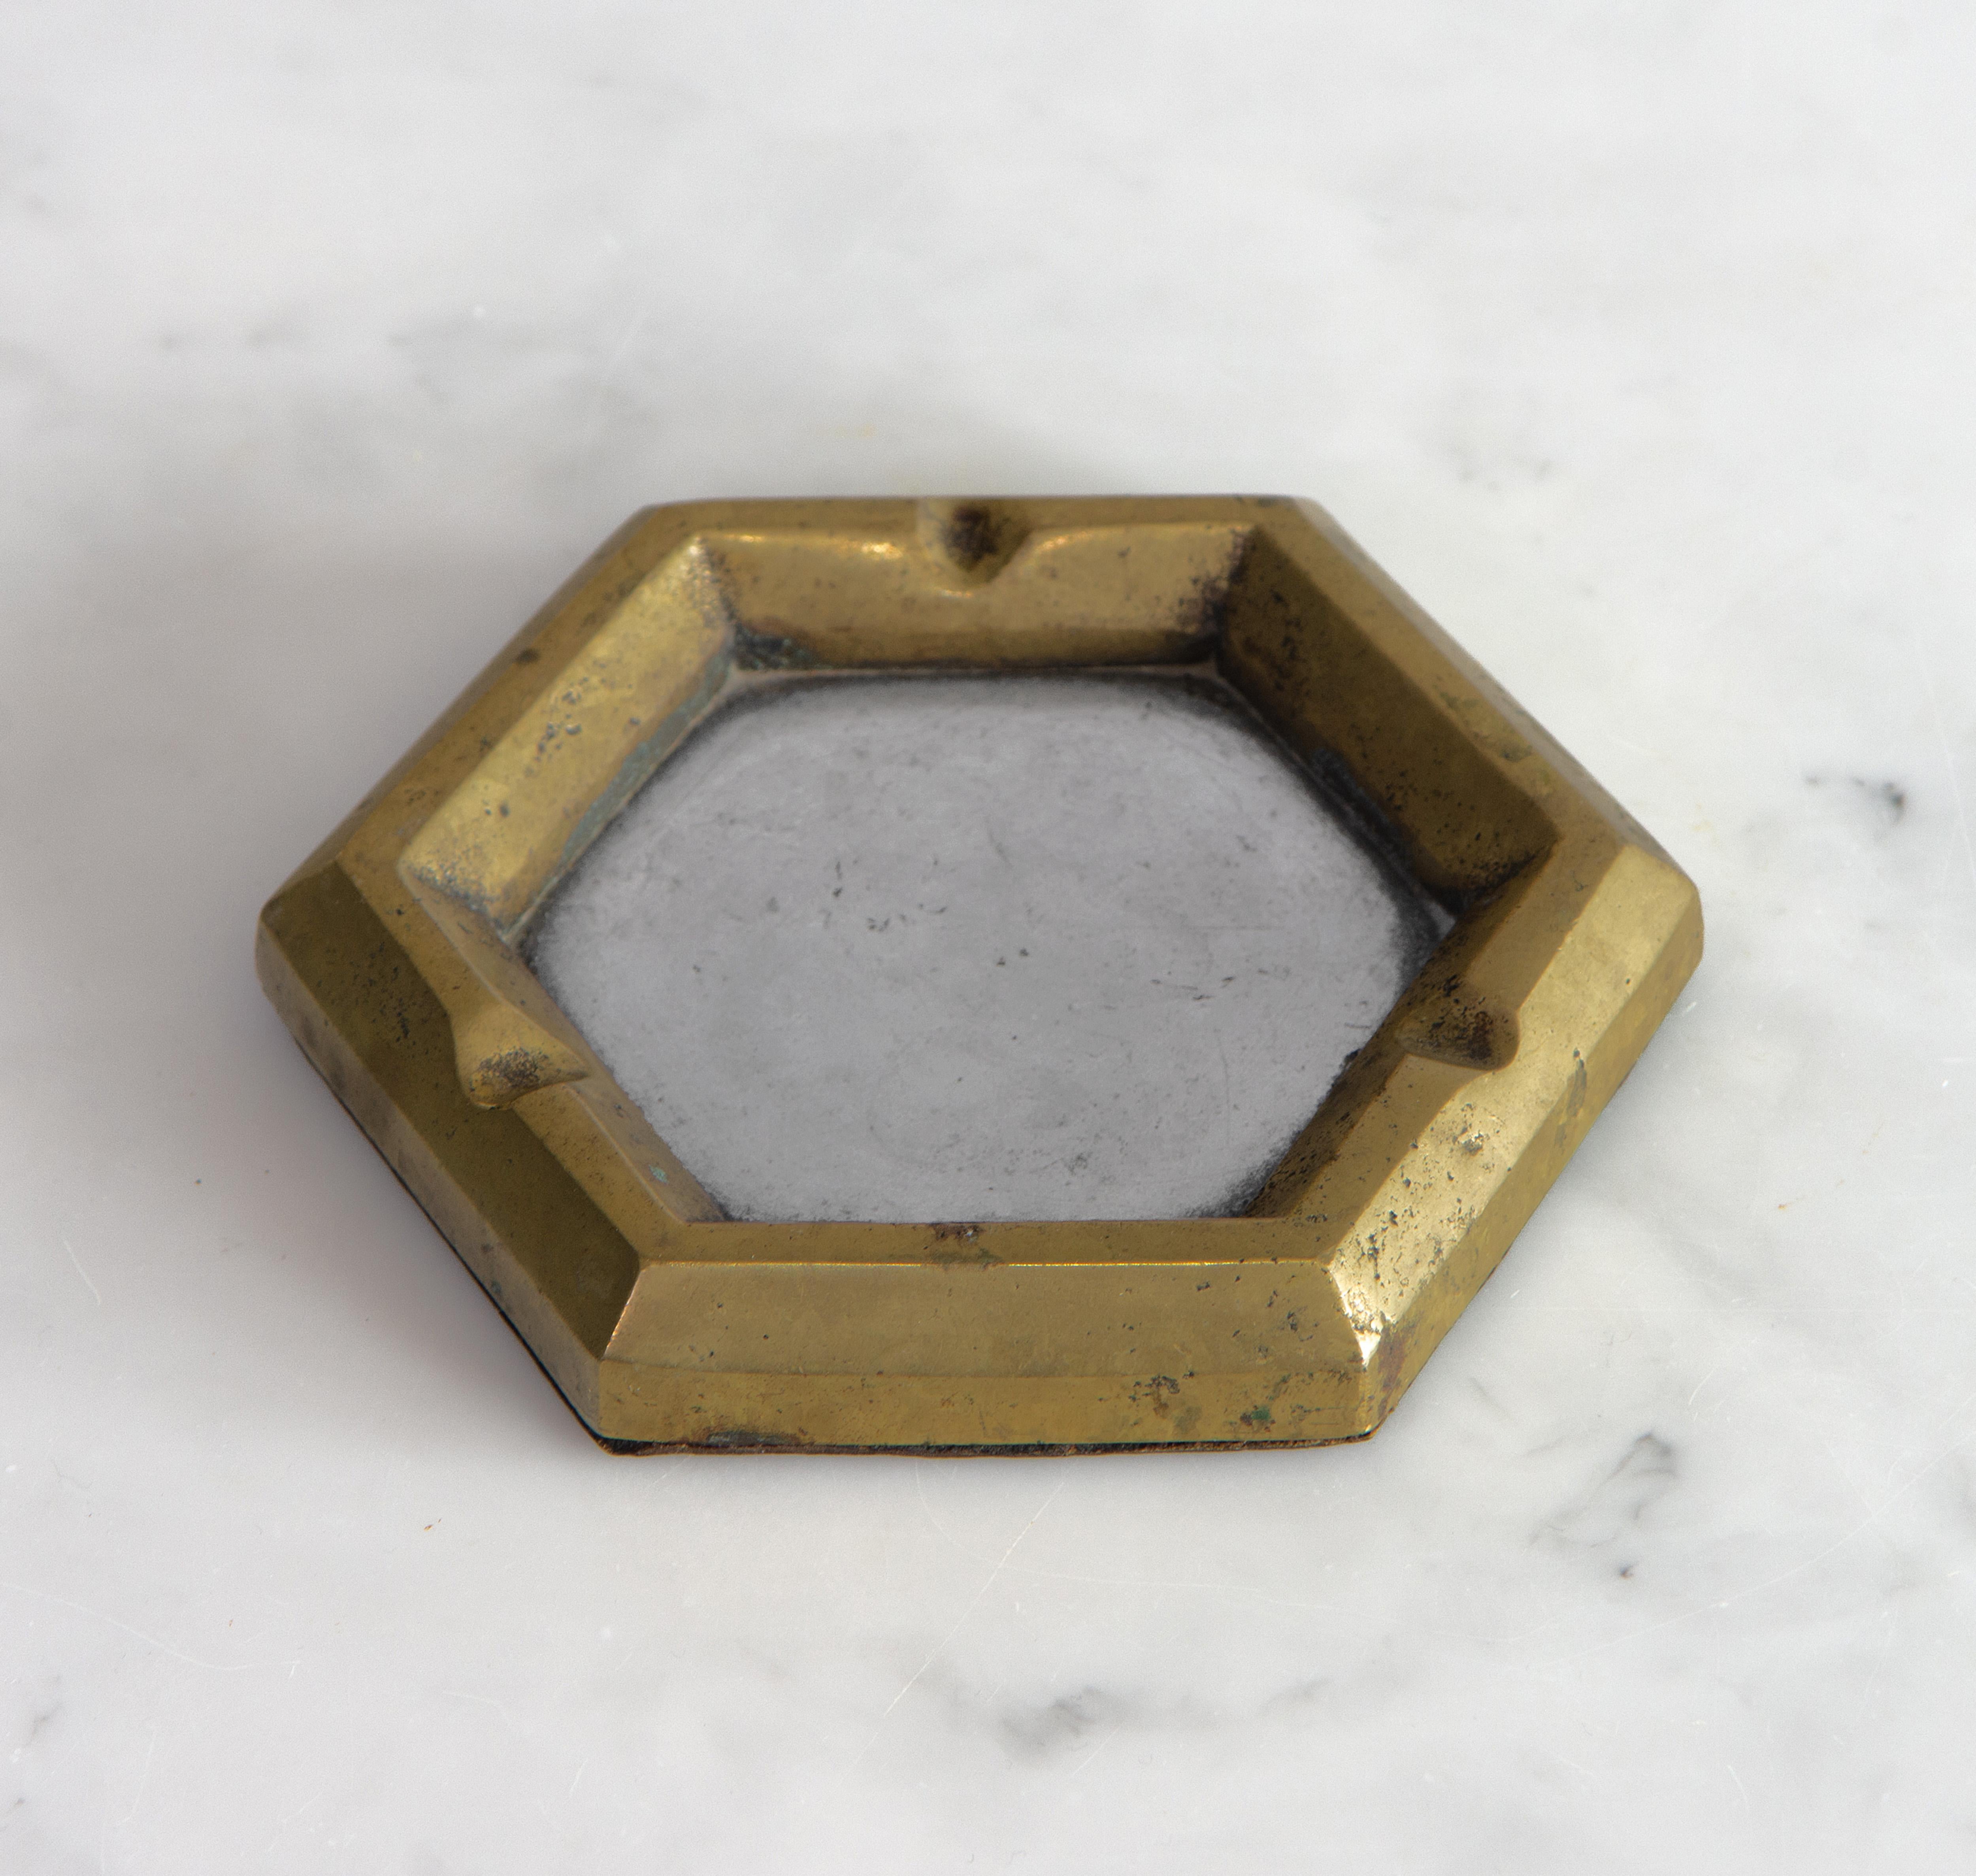 An aluminium and cast brass ashtray designed by David Marshall, circa 1970-80s.

Delivery included to mainland UK.

Demonstrating the sculptor's signature use of contrasting metals. The underside has a leather base with the imprinted maker's mark.